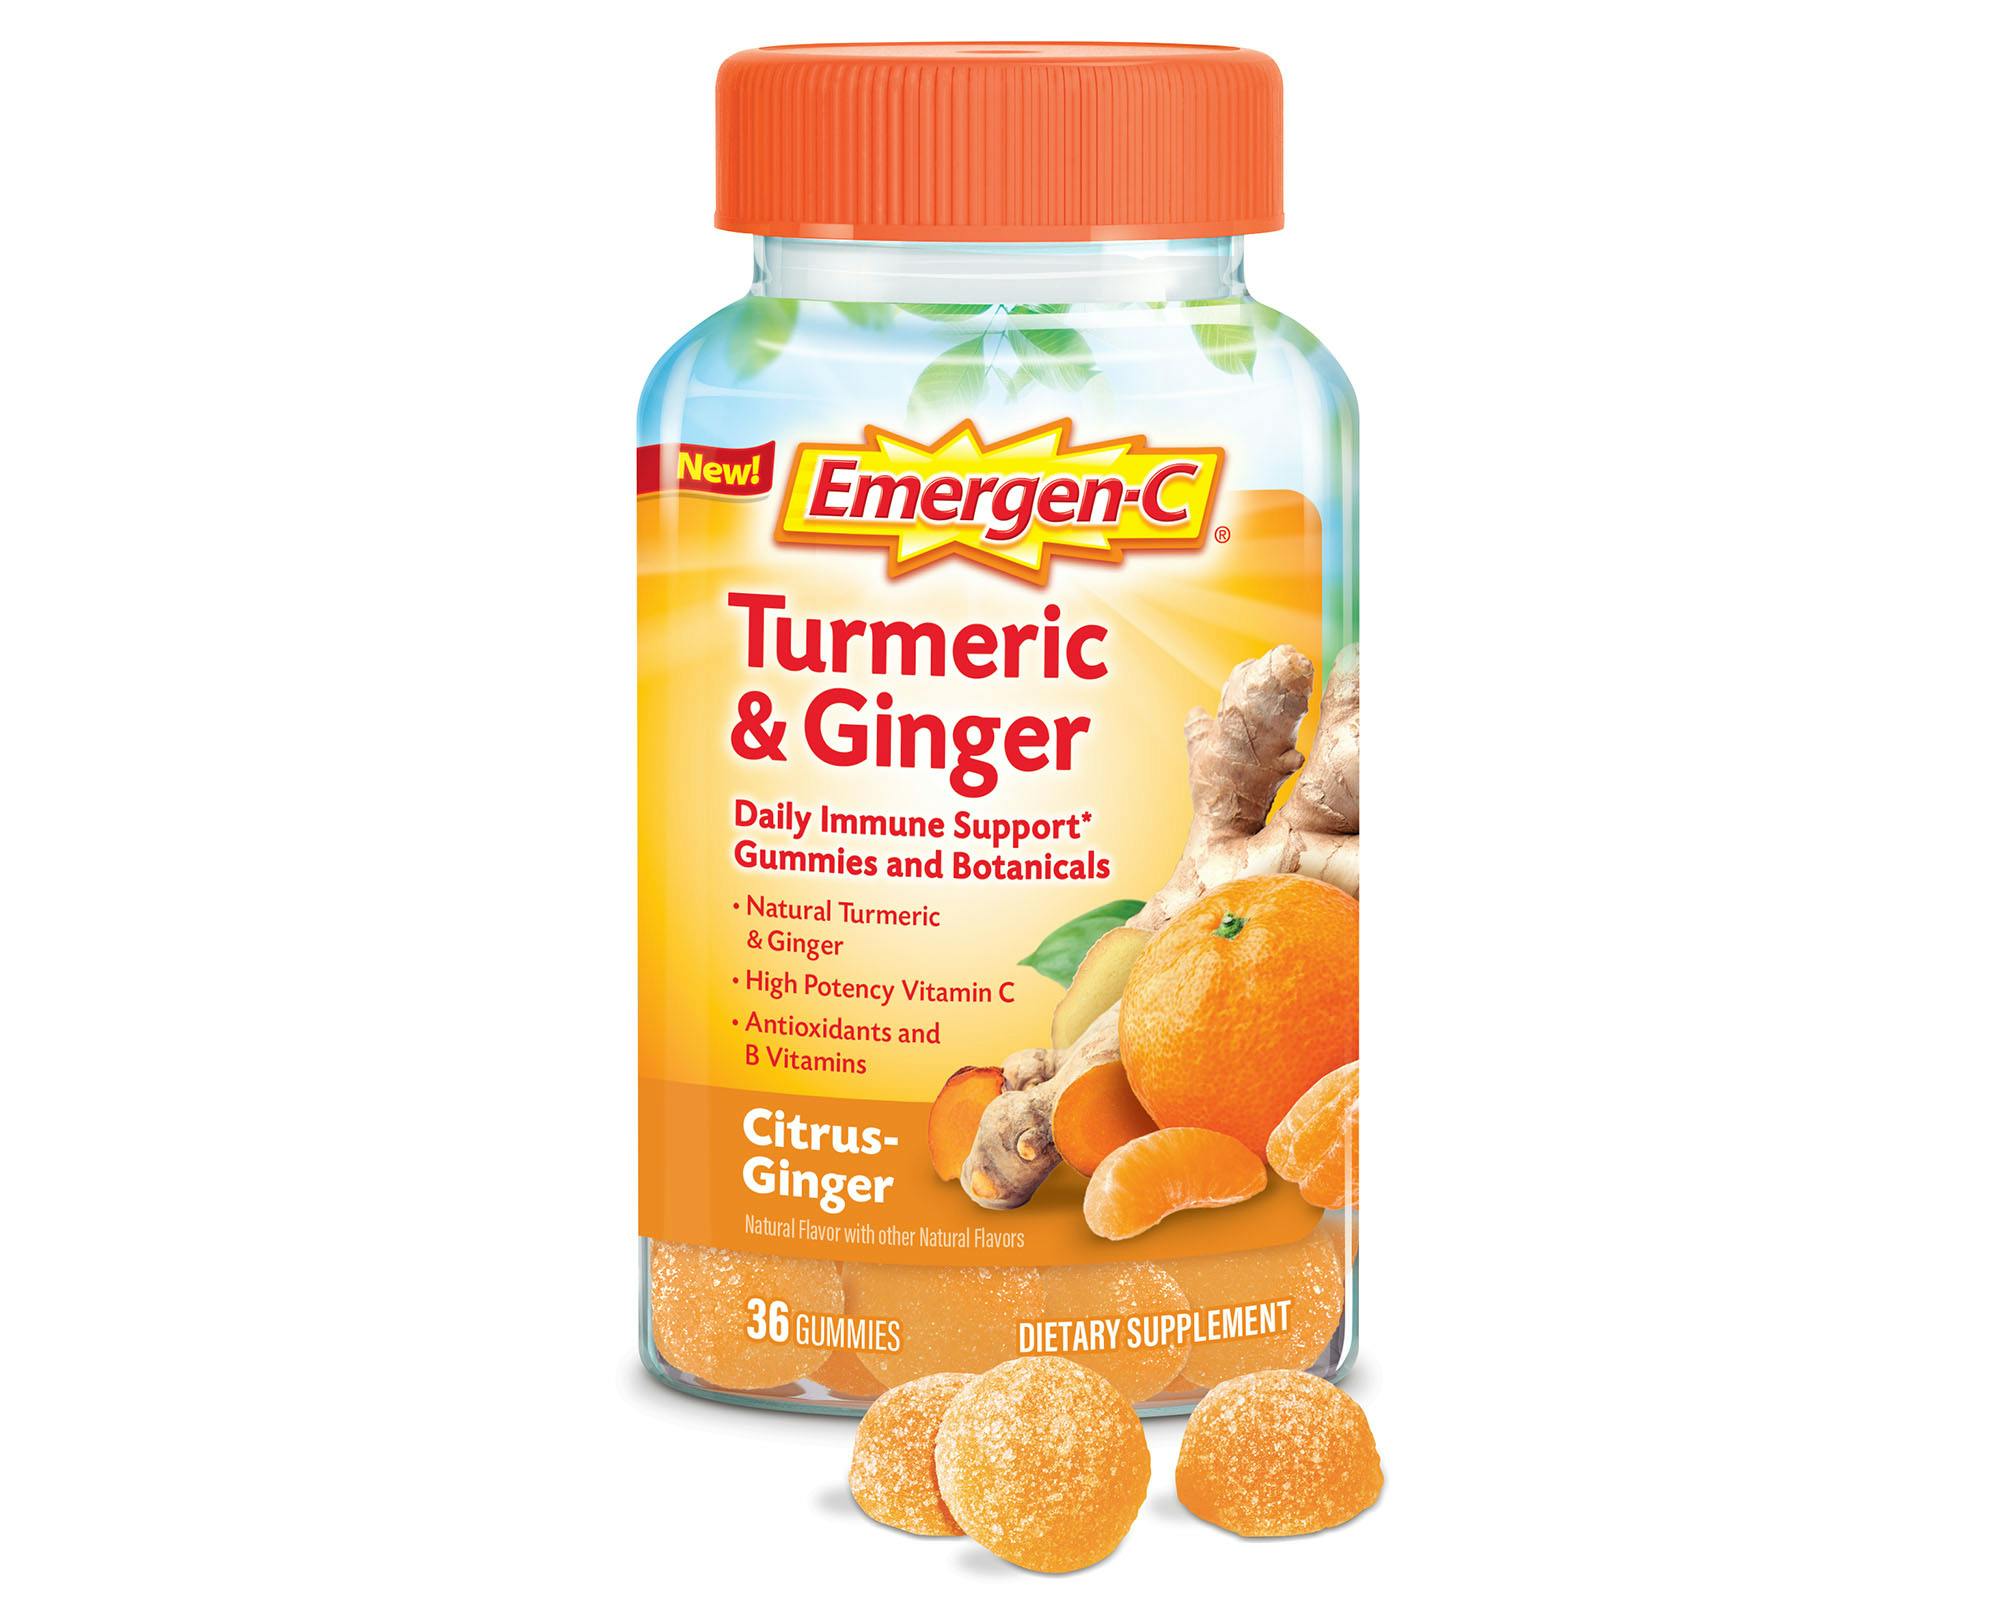 Turmeric & Ginger Botanicals Immune Support Gummies bottle with gummies grouping